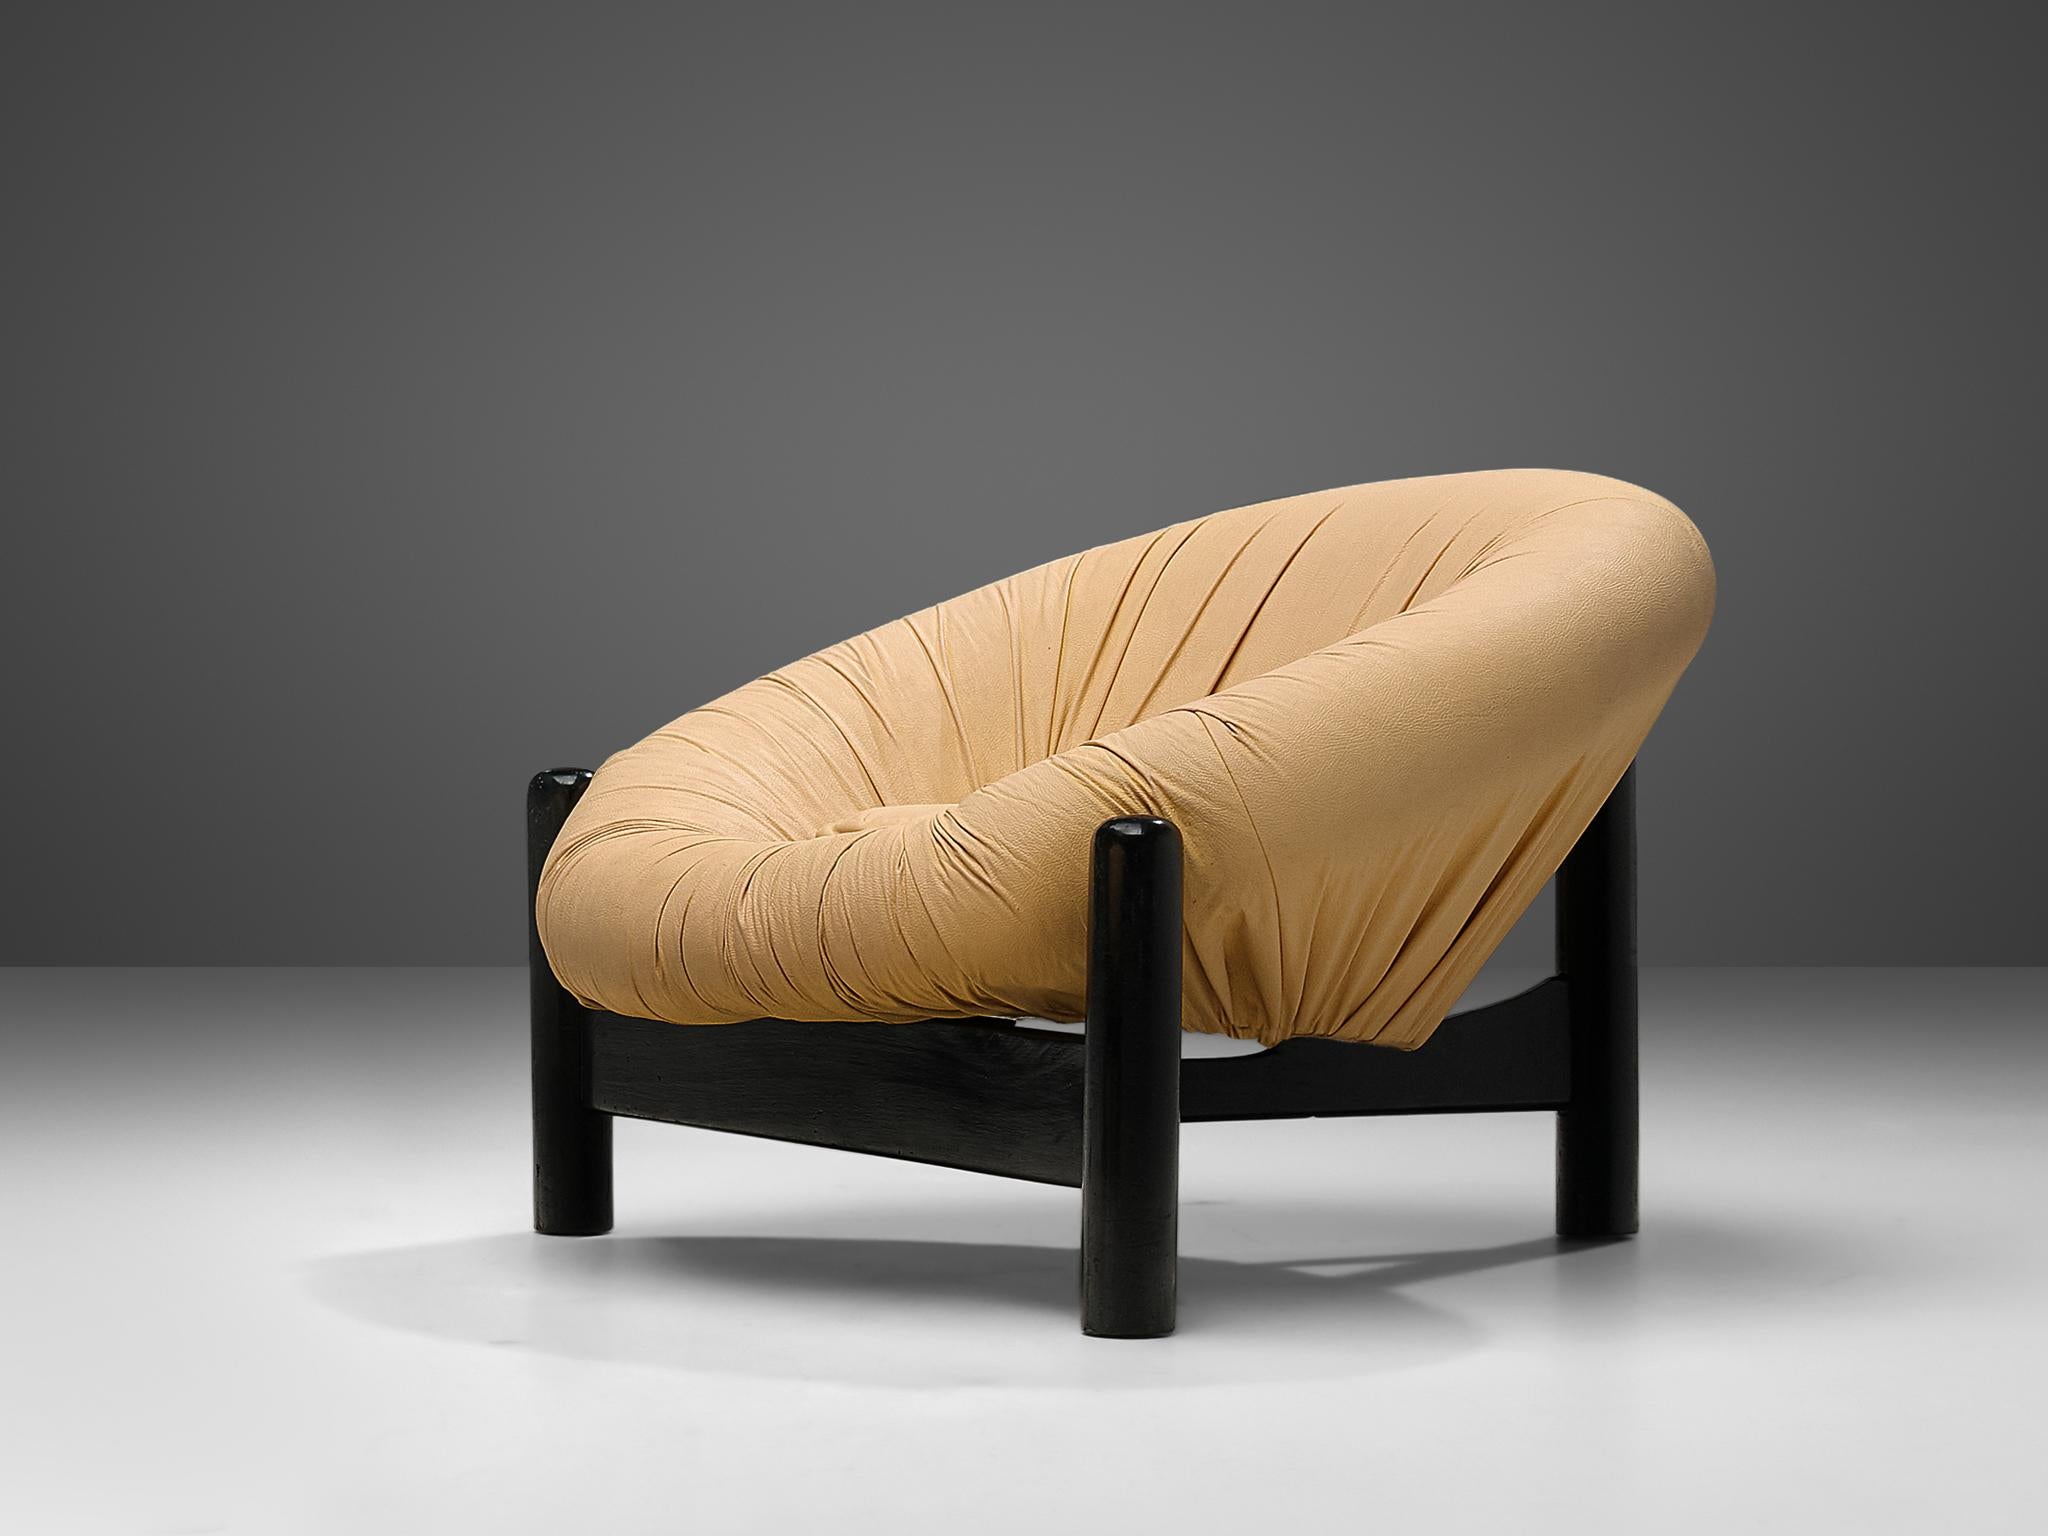 Lounge chair, leather, lacquered wood, Brazil, 1970s

This bulky Brazilian lounge chair consists of a round shell that forms a ring around the seat. The beige camel upholstery is tufted around the shell in dynamic folds. The shape invites to take a